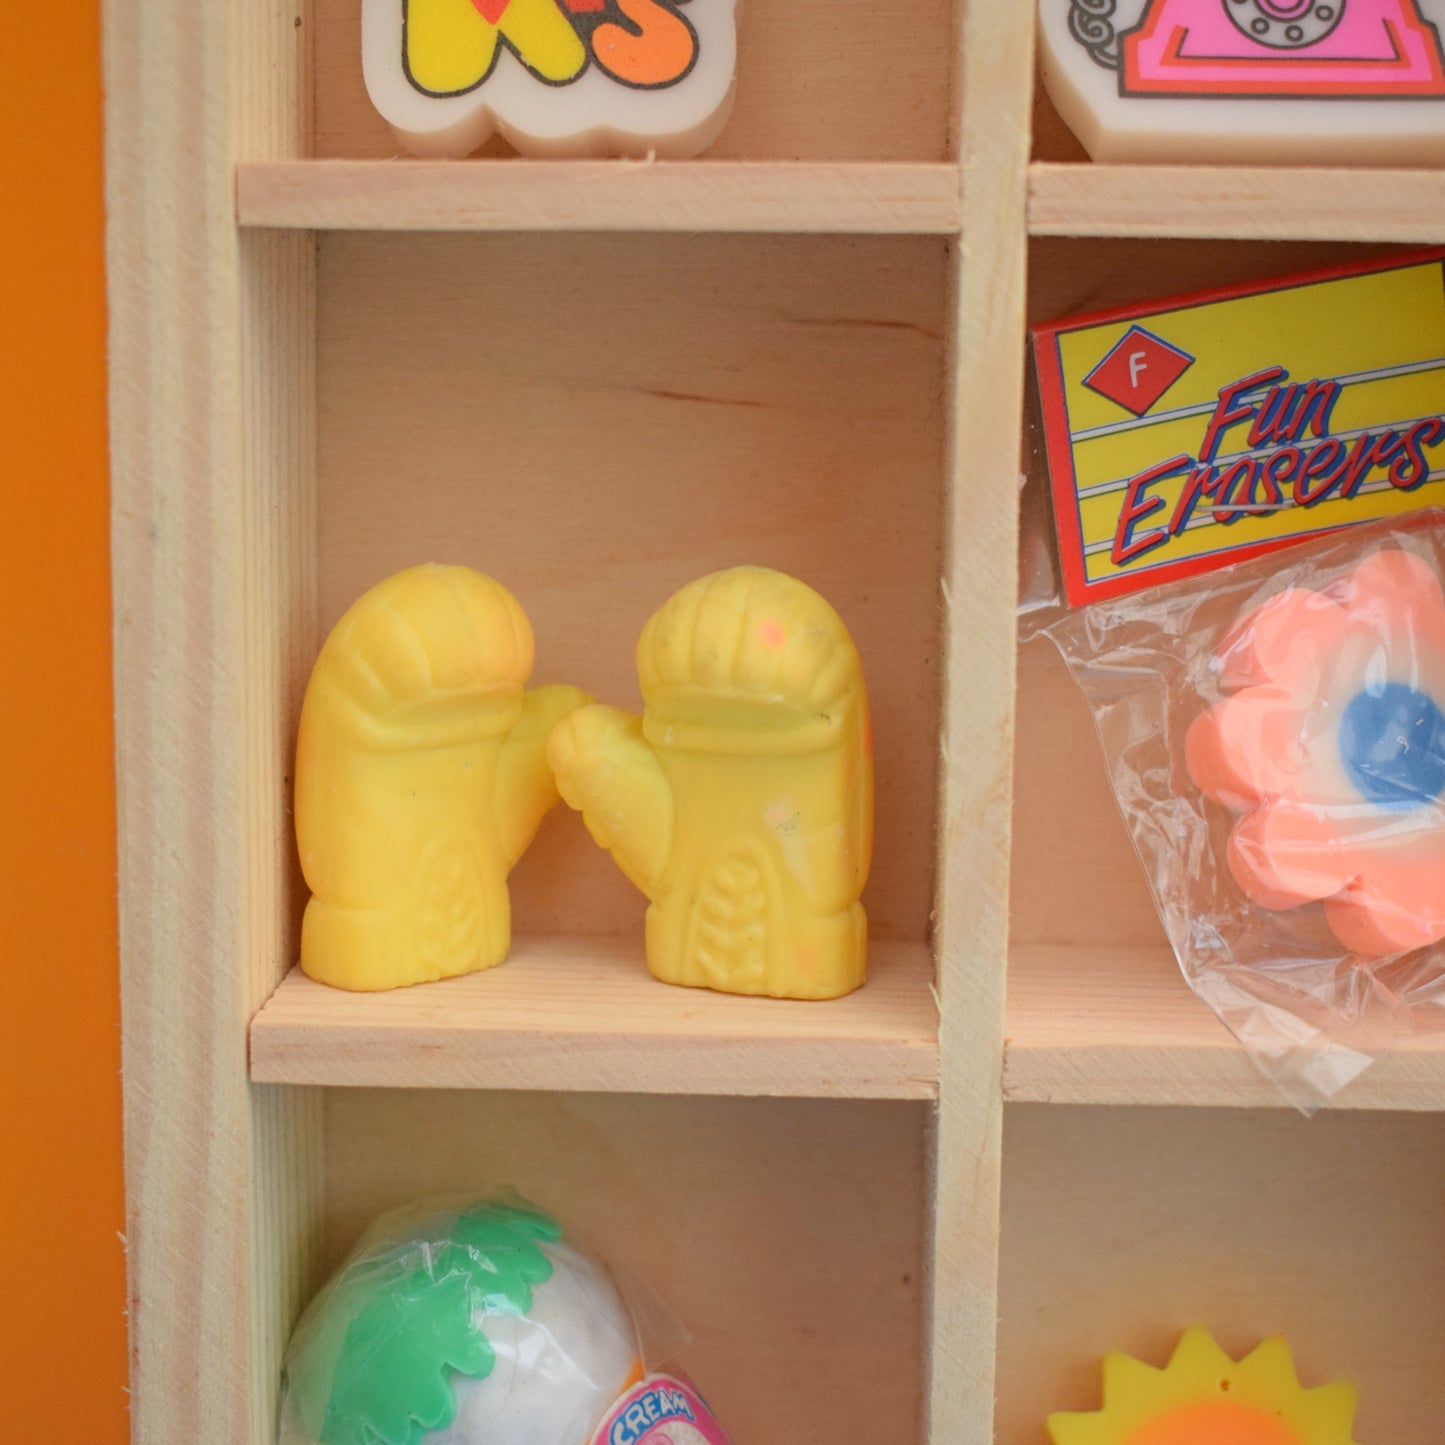 Vintage 1980s Collectable Erasers / Rubbers